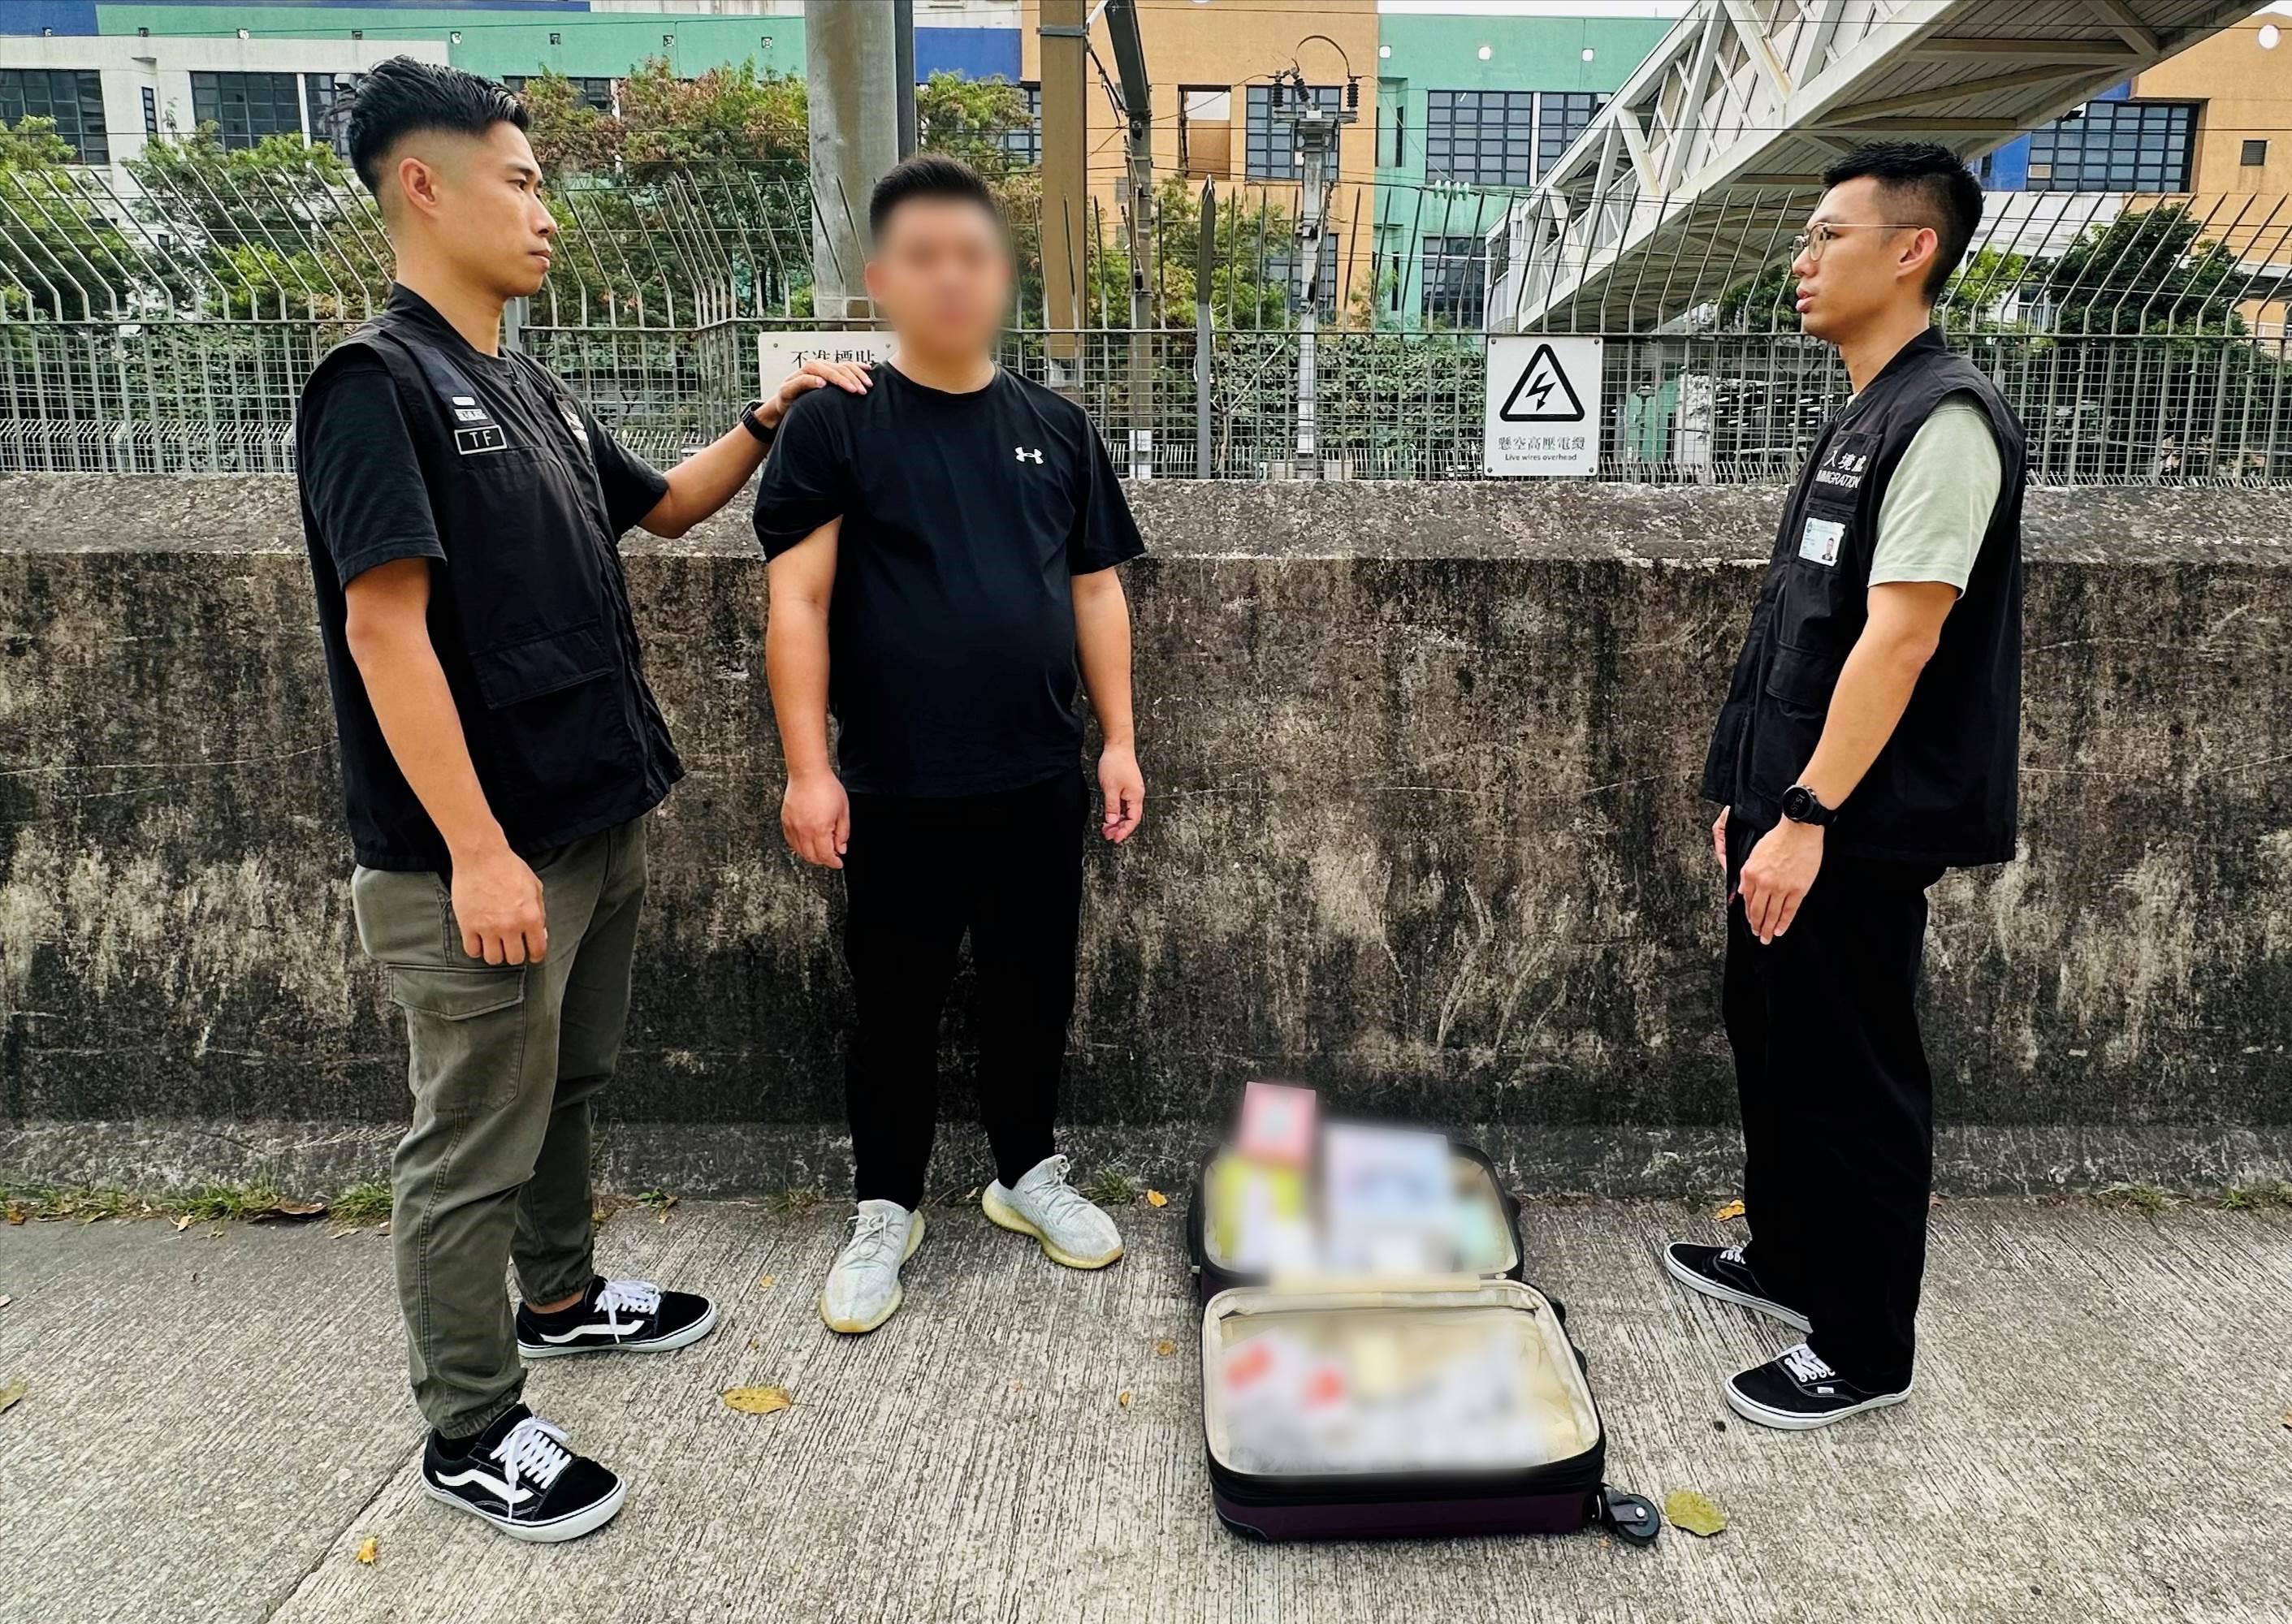 The Immigration Department mounted a series of territory-wide anti-illegal worker operations codenamed "Twilight", and joint operations with the Hong Kong Police Force codenamed "Champion" and "Windsand", for four consecutive days from December 11 to yesterday (December 14). Photo shows a Mainland visitor involved in suspected parallel trading activities and his goods.